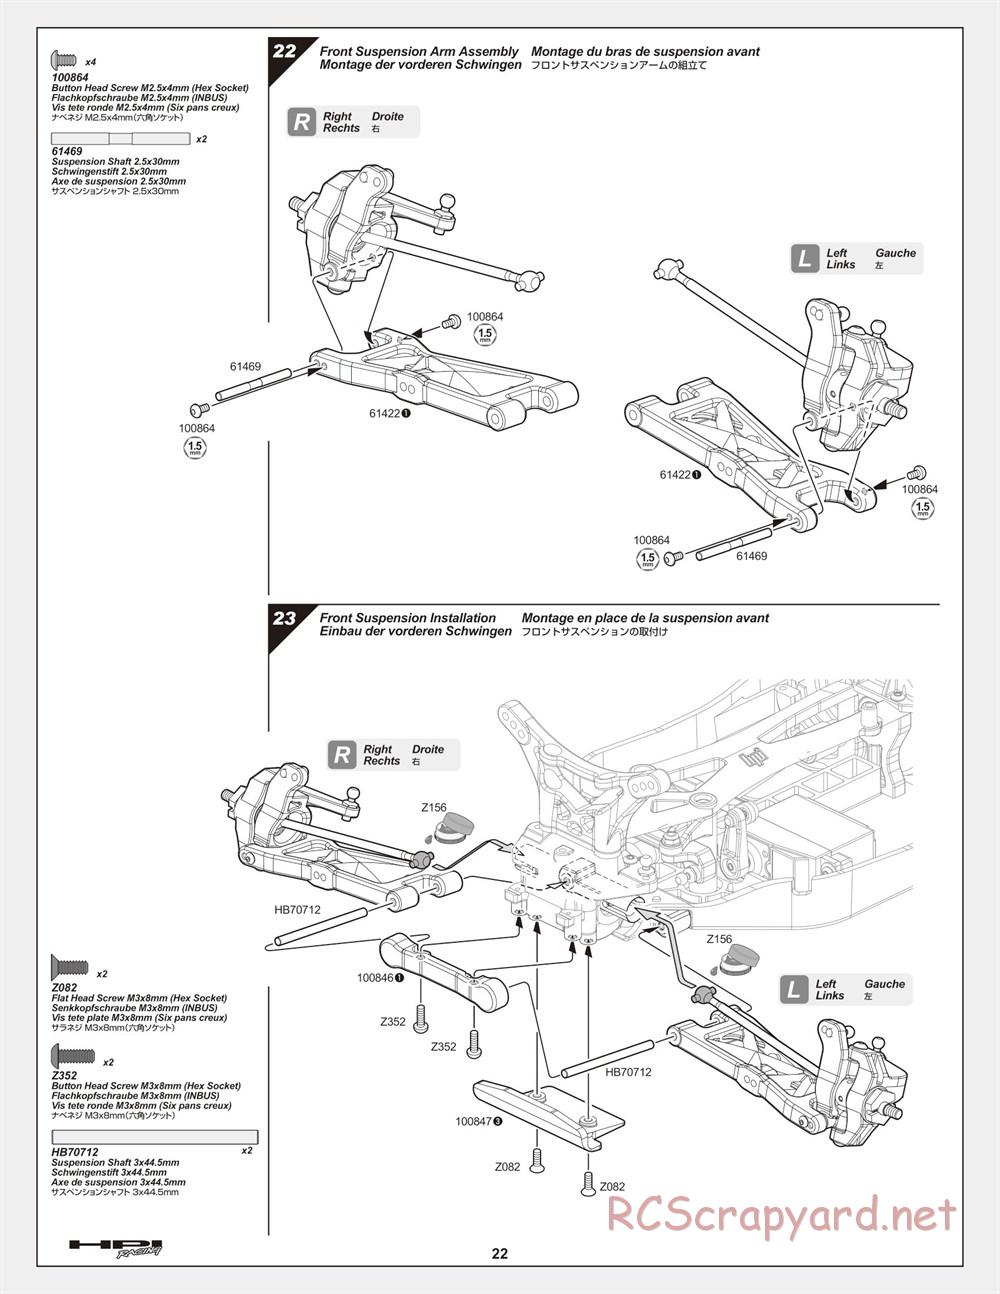 HPI - Cyber 10B - Manual - Page 22